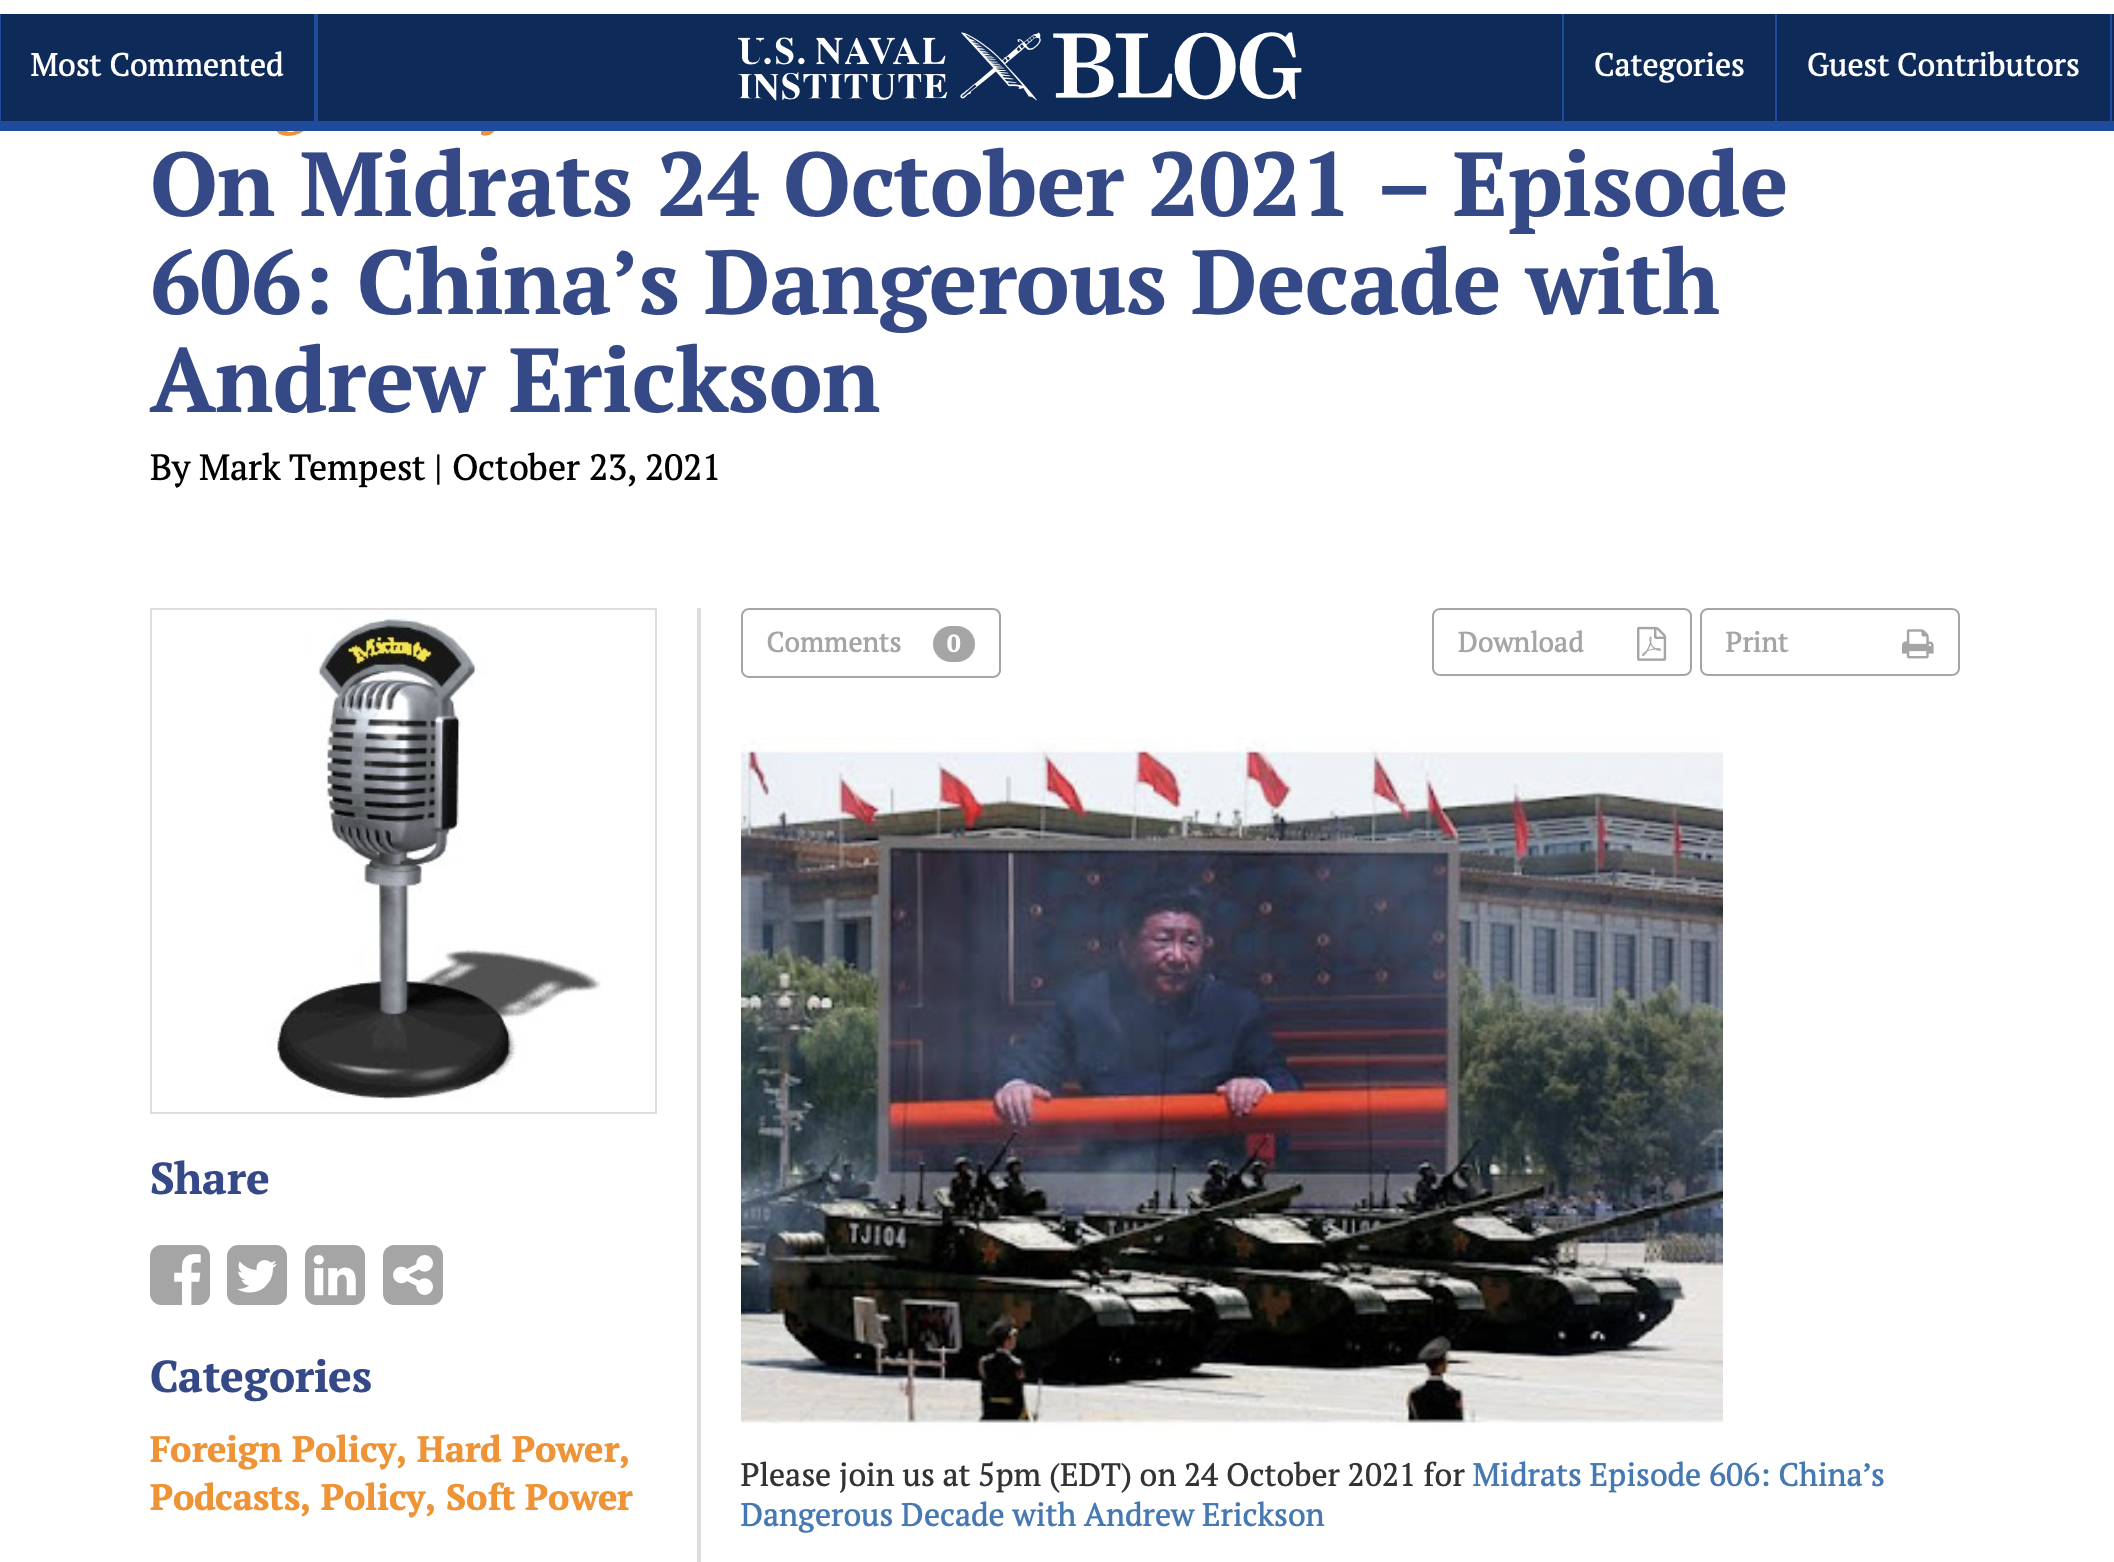 On Midrats 24 October 2021 – Episode 606: China’s Dangerous Decade with Andrew Erickson By Mark Tempest | October 23, 2021